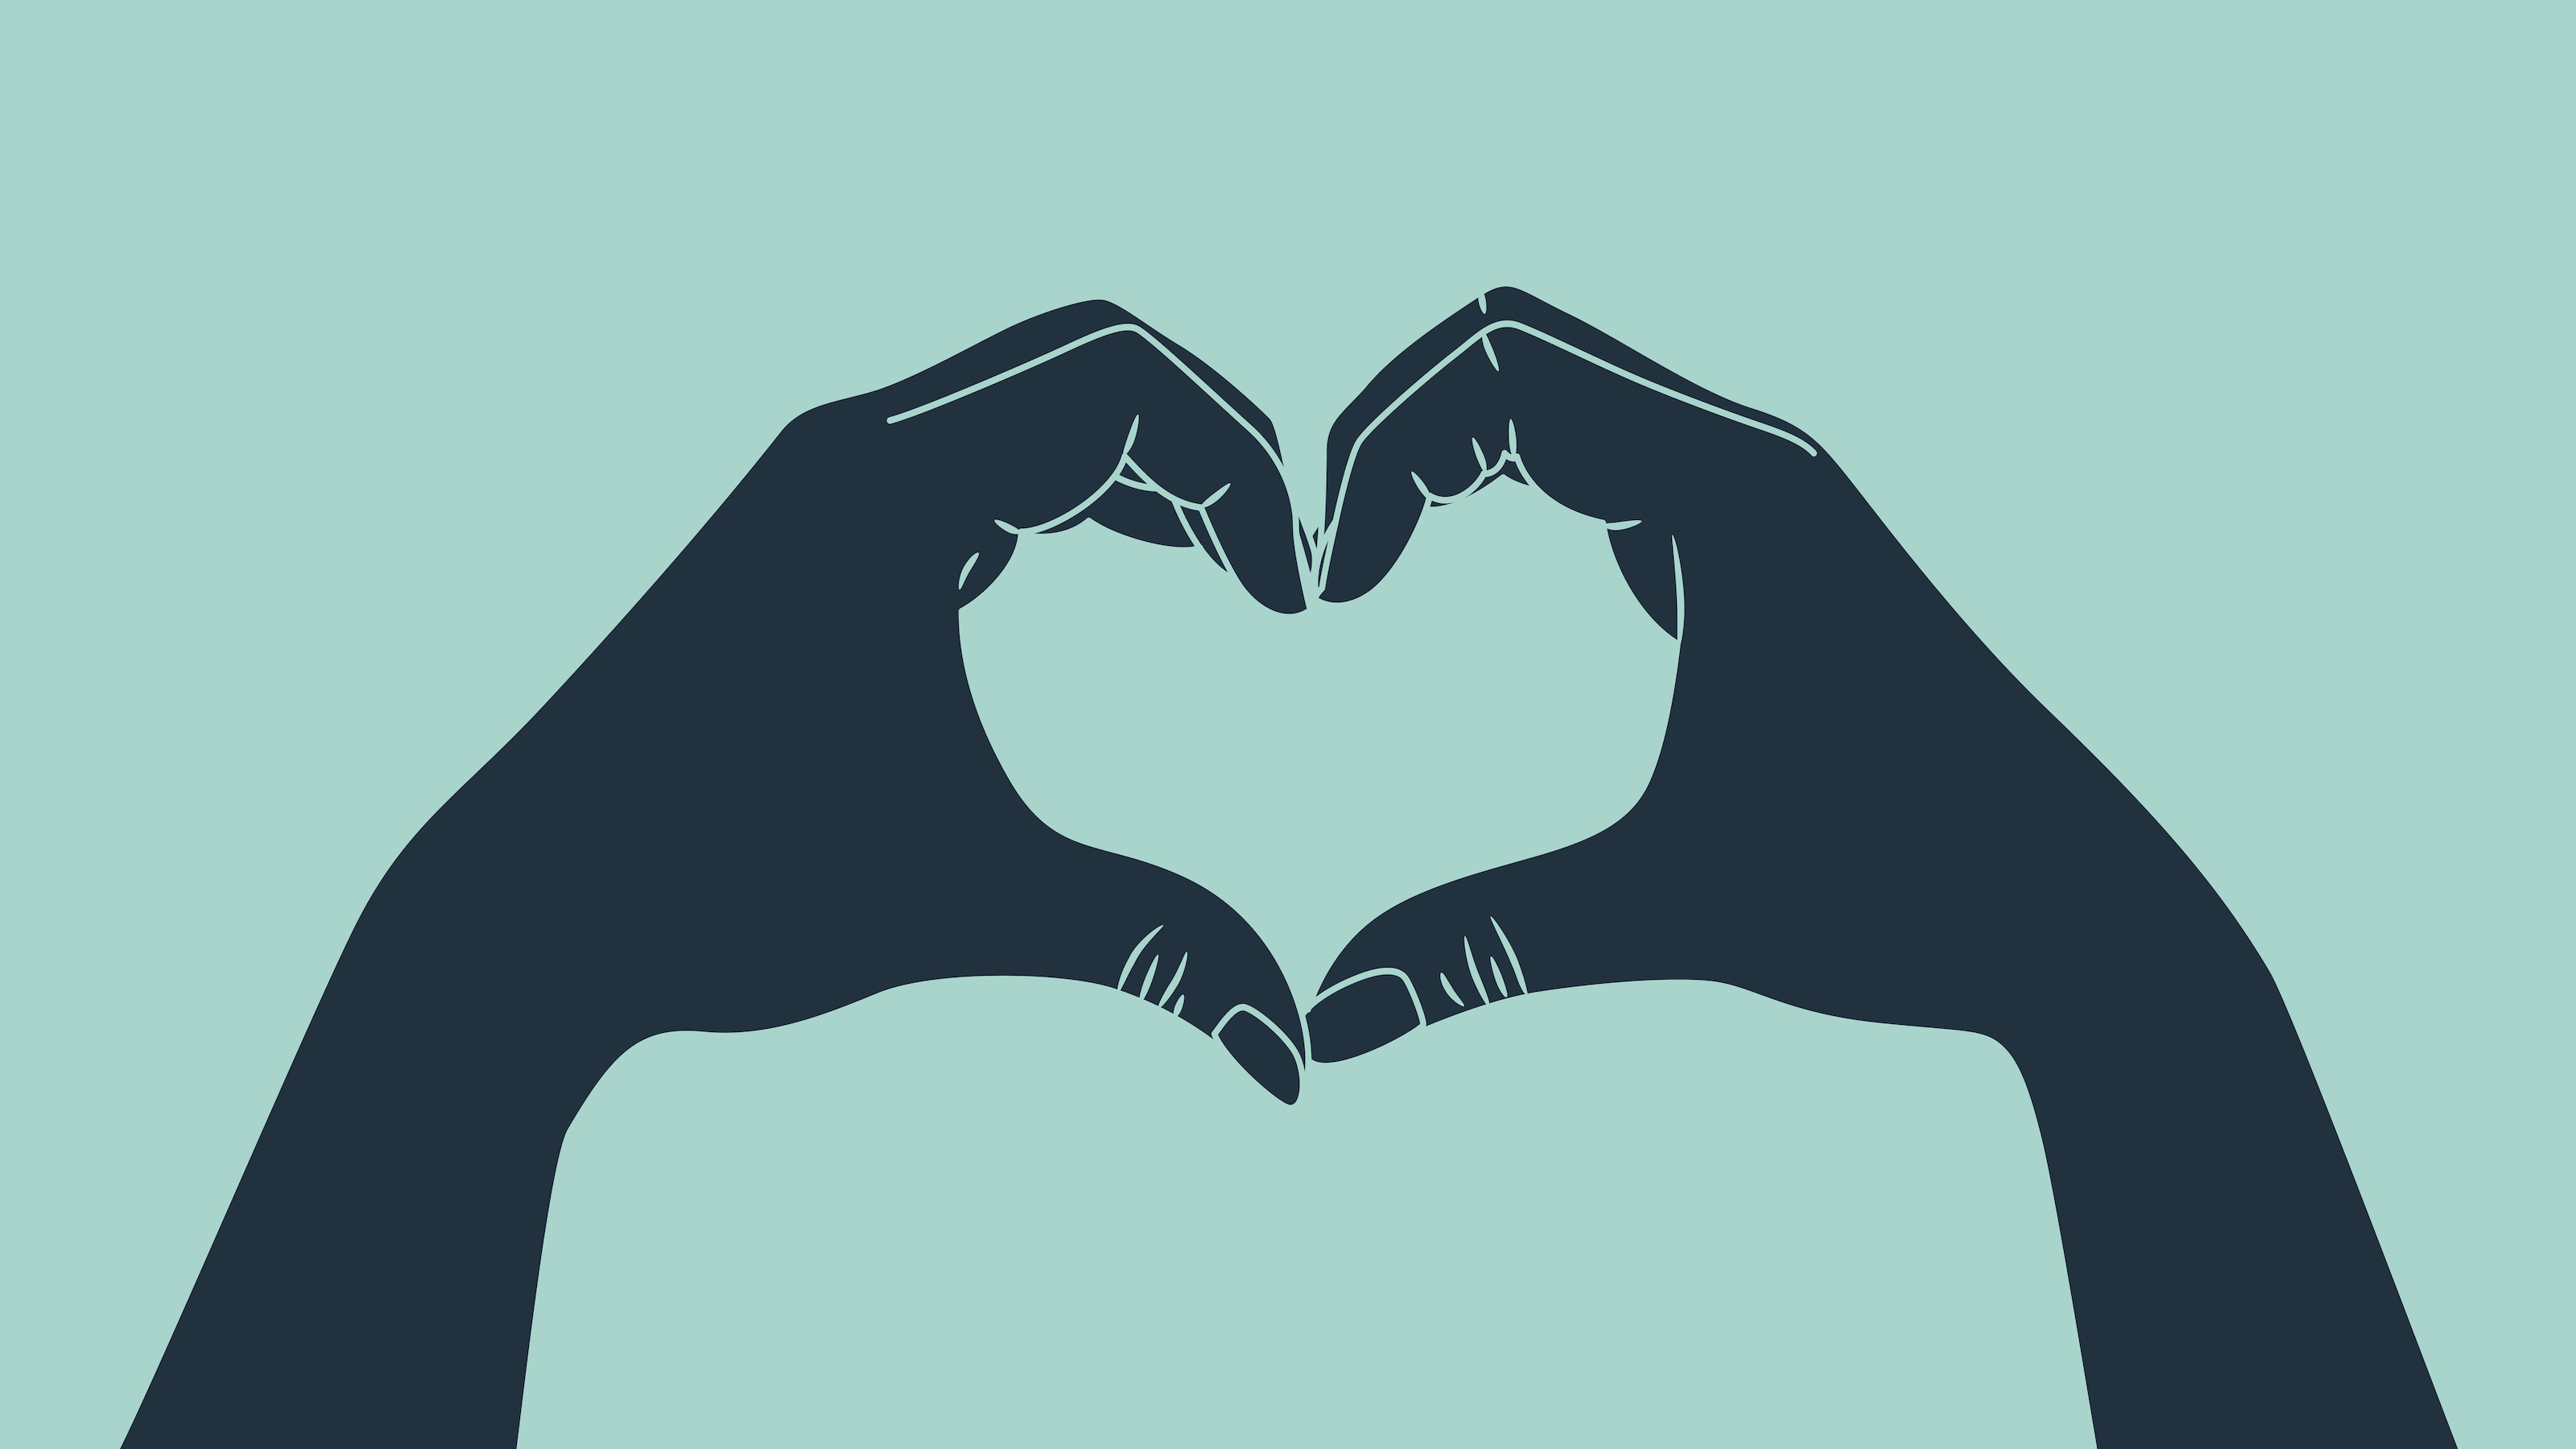 Two silhouetted hands forming a heart shape against a teal background, symbolizing team appreciation.